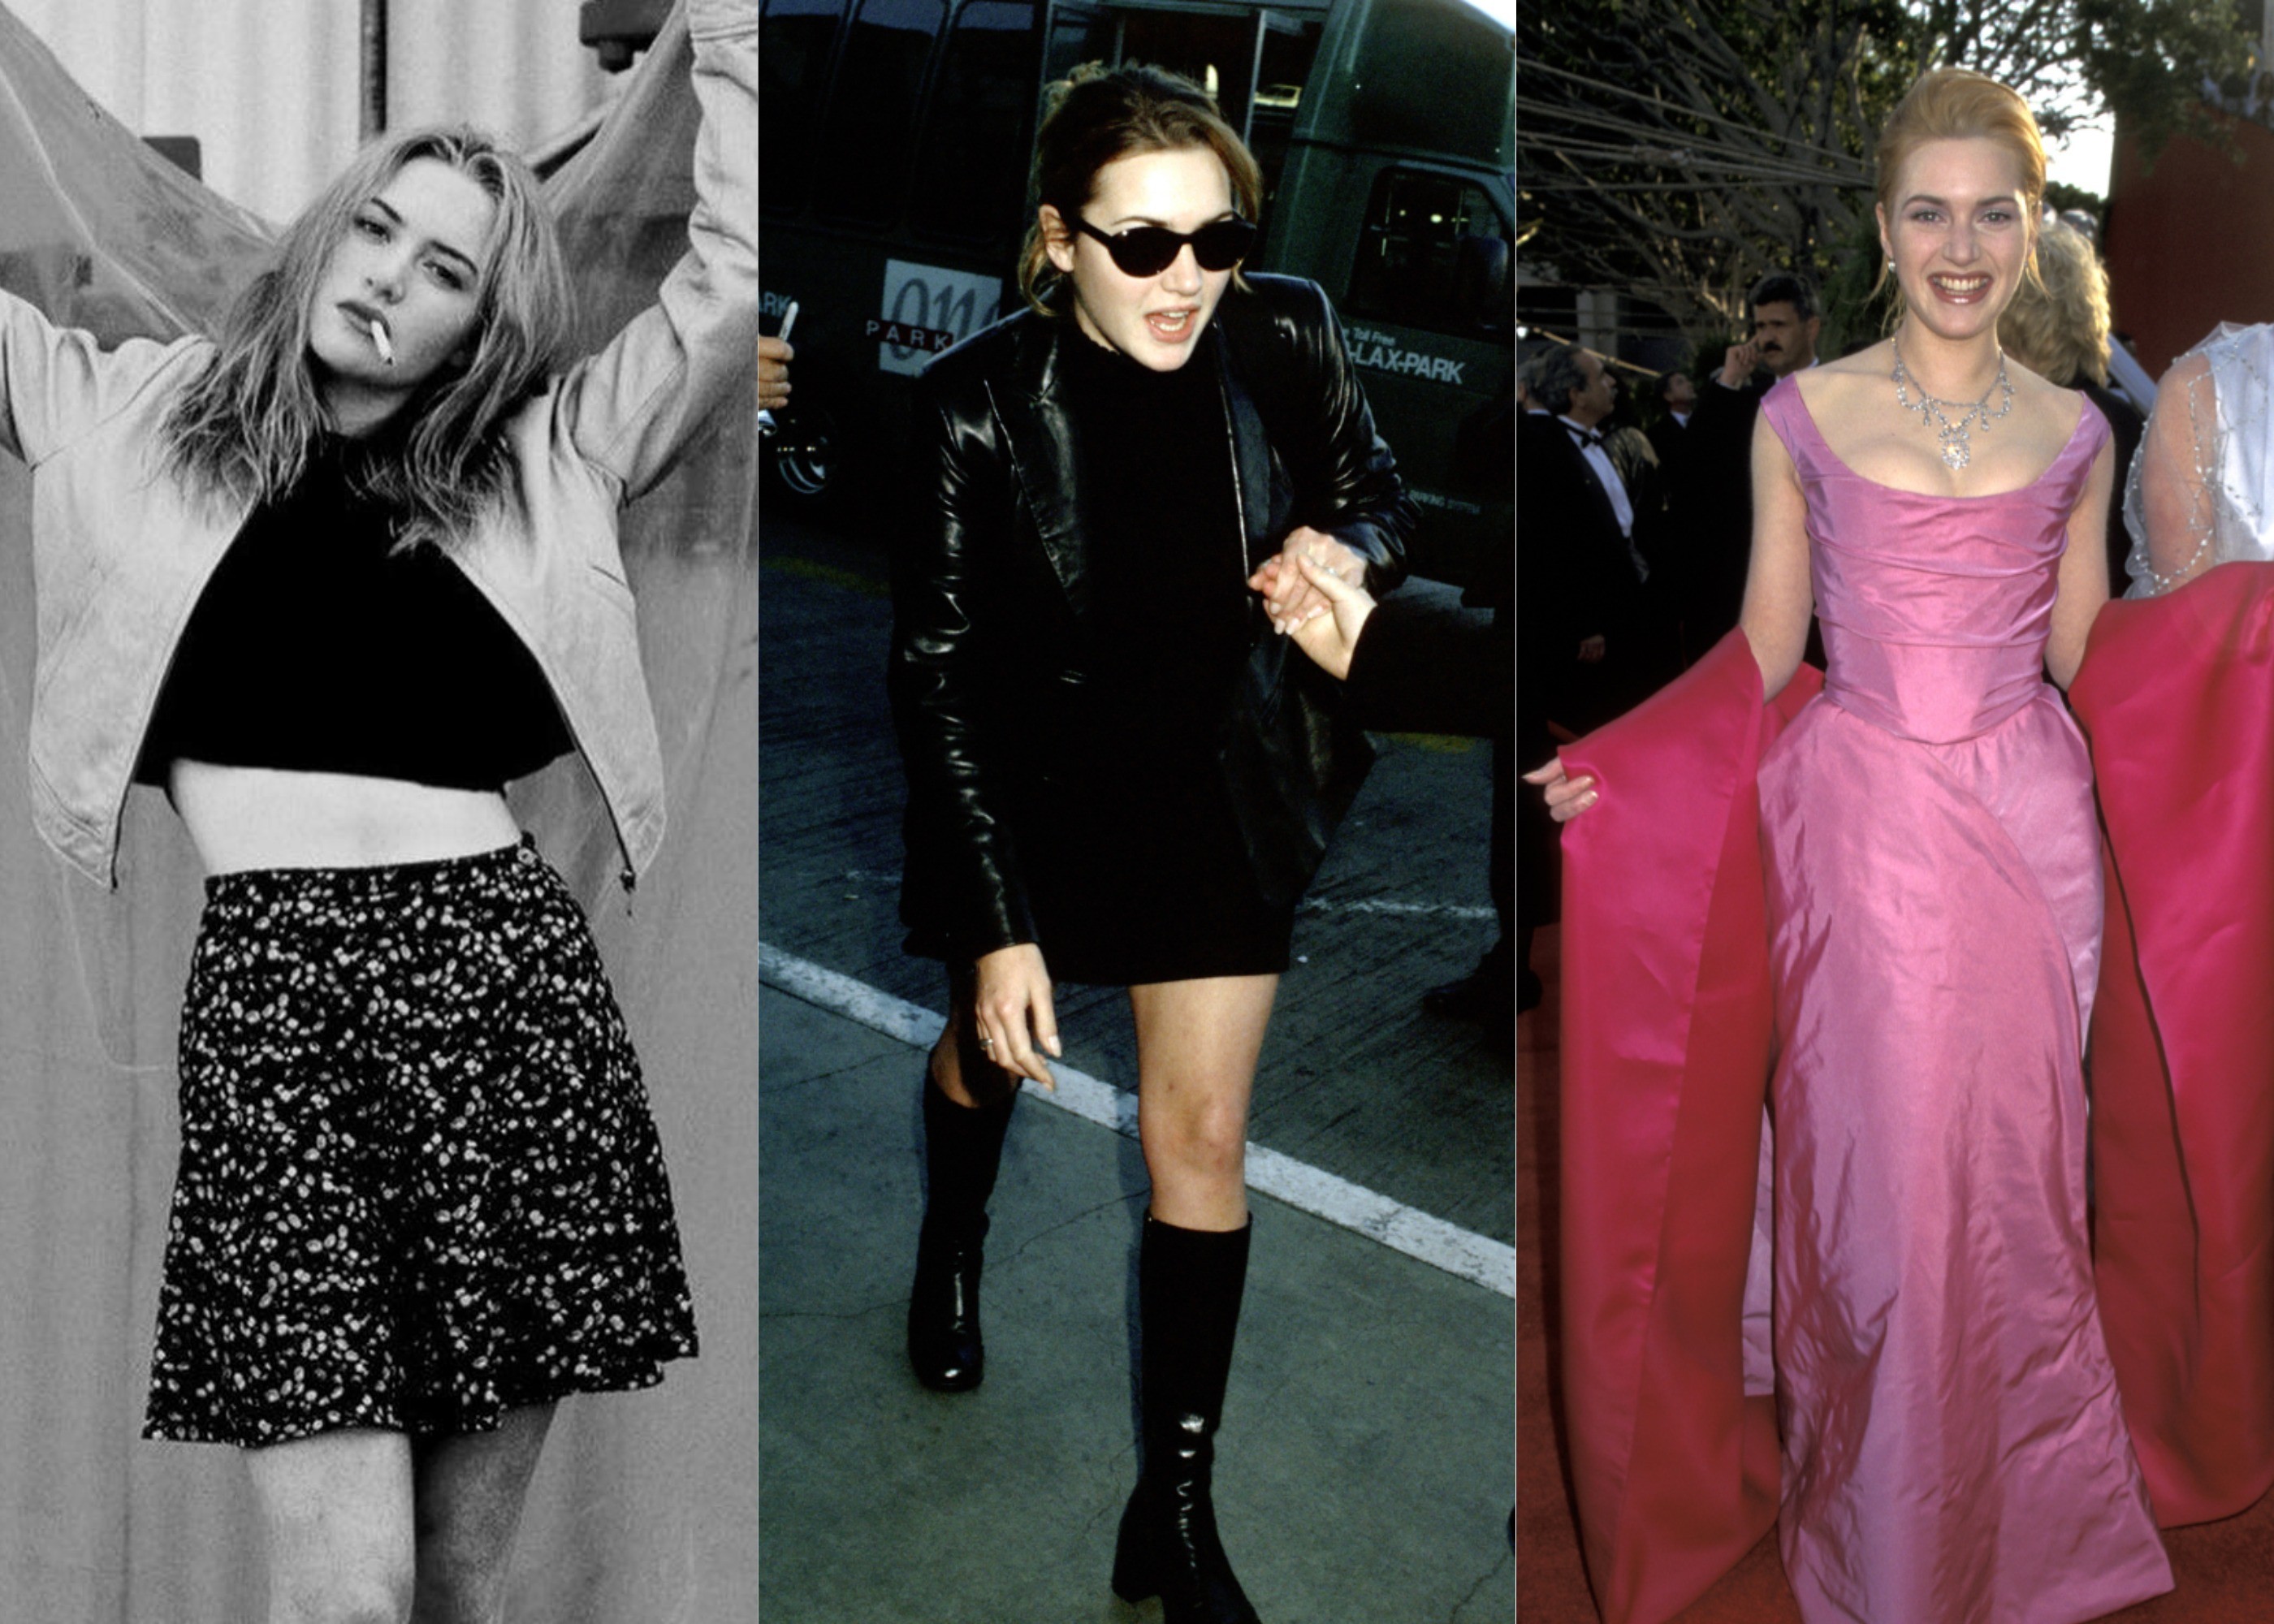 Celebrities Iconic Looks From the '90s 